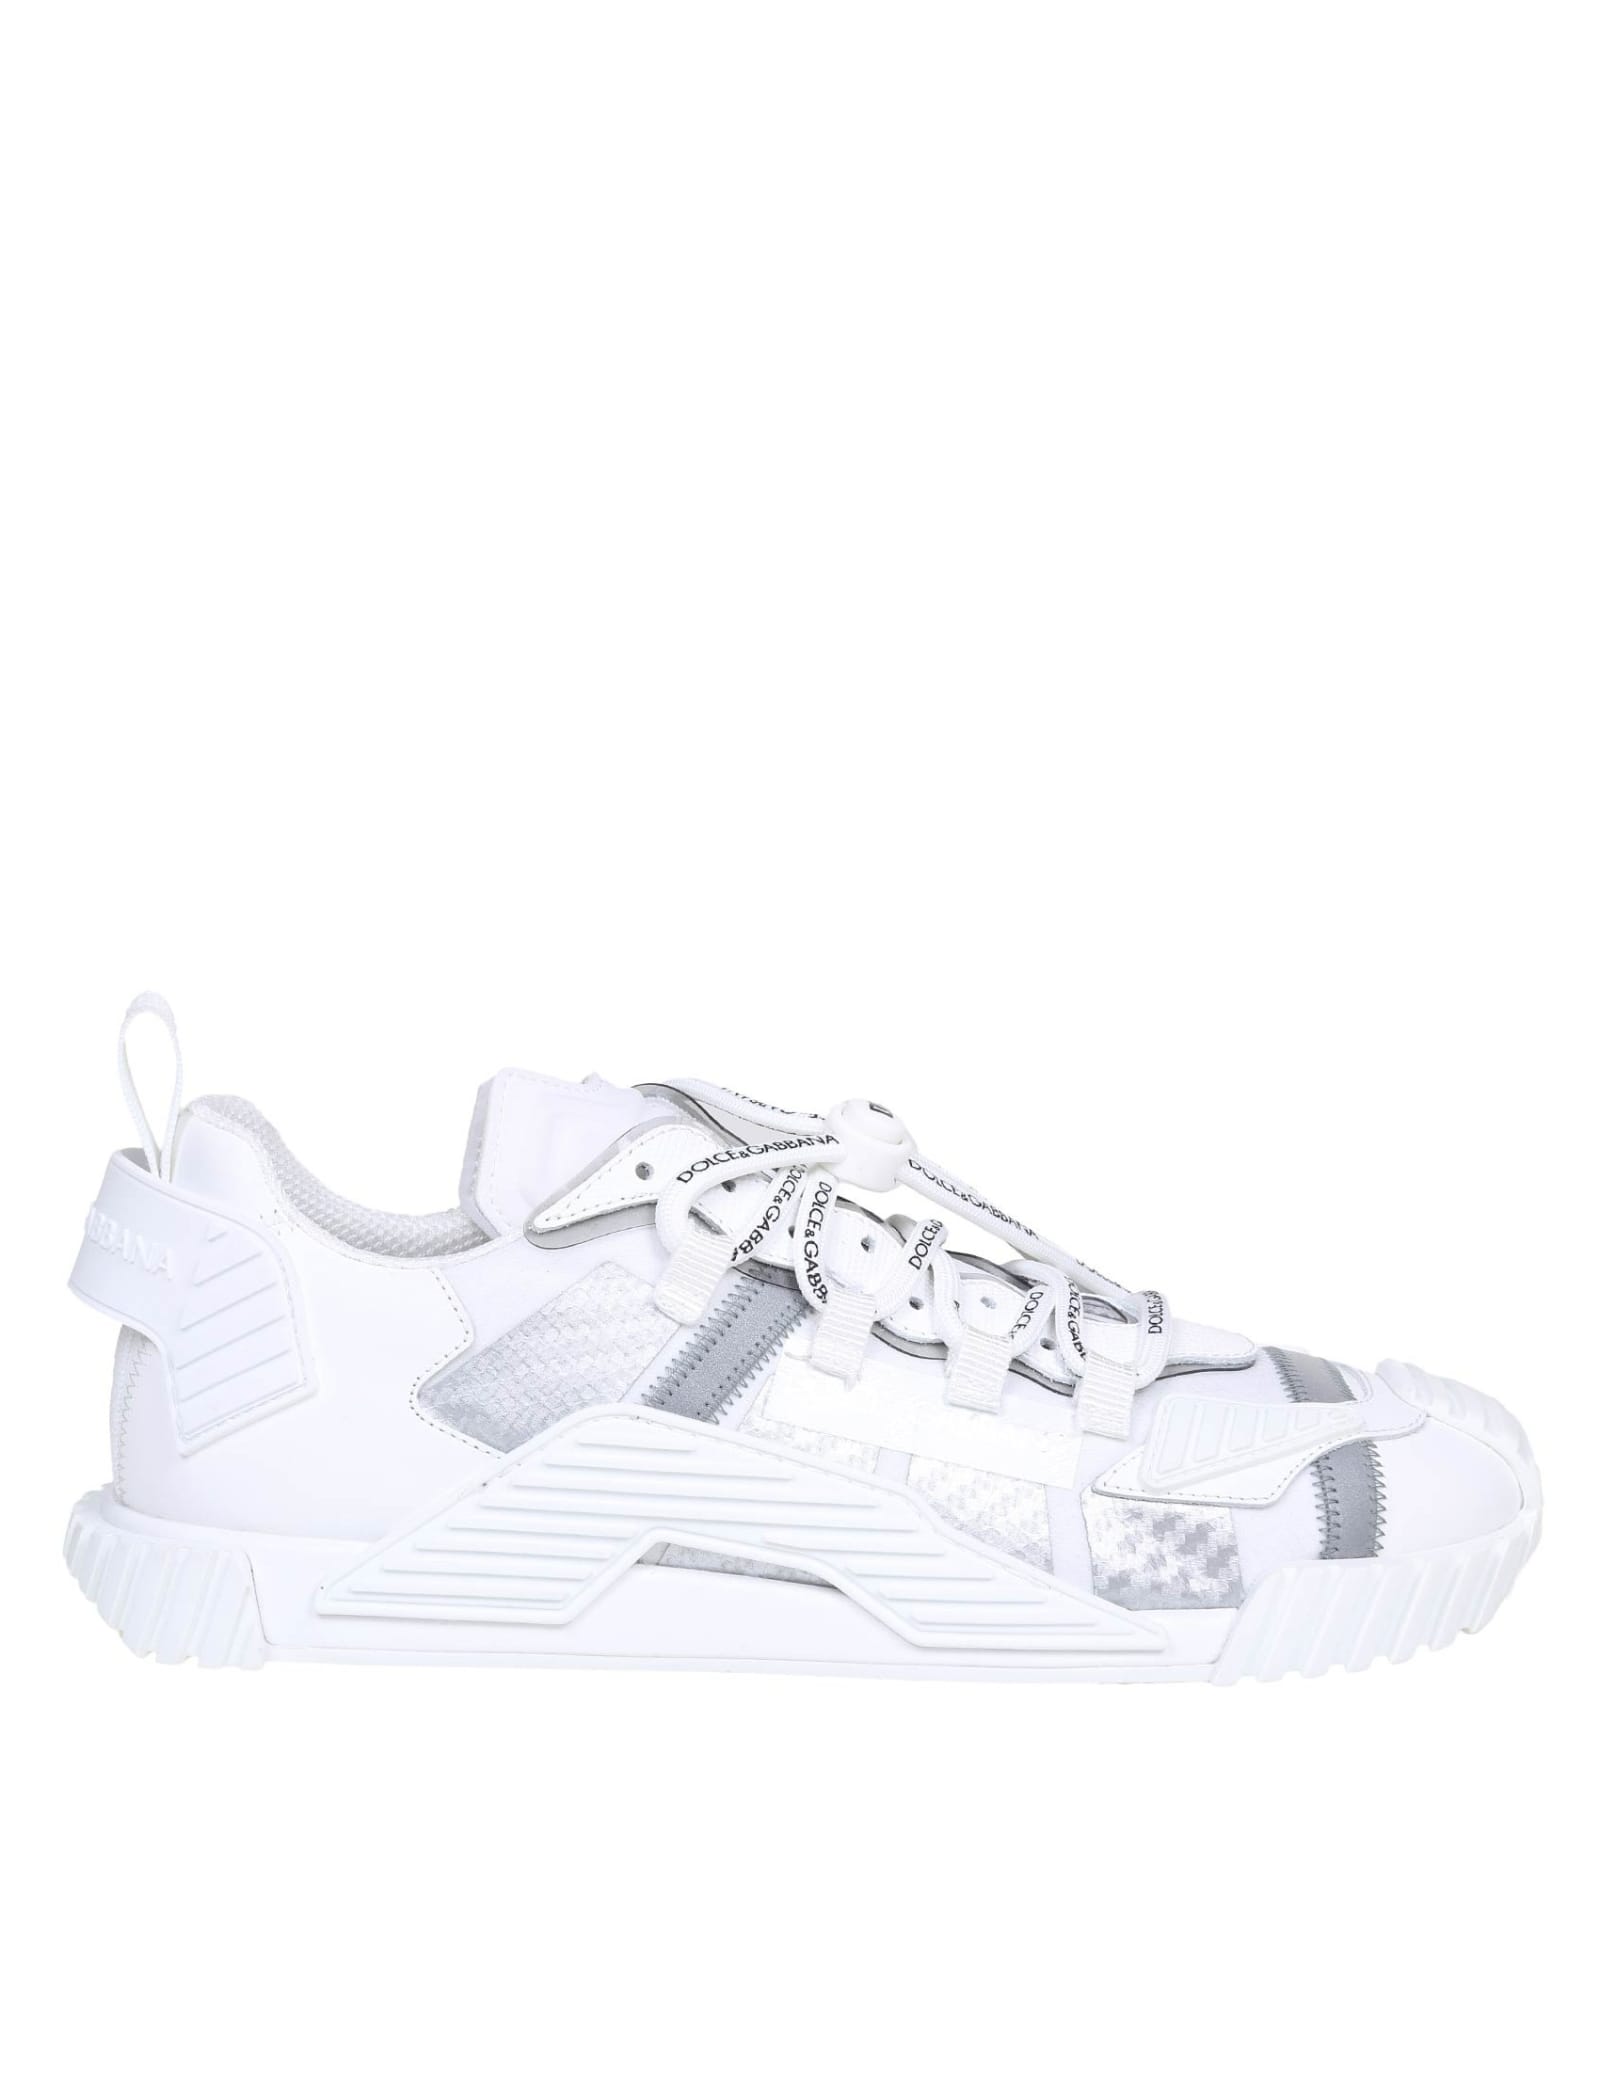 Dolce & Gabbana Slip On Ns1 In Mix Of Materials In White/white